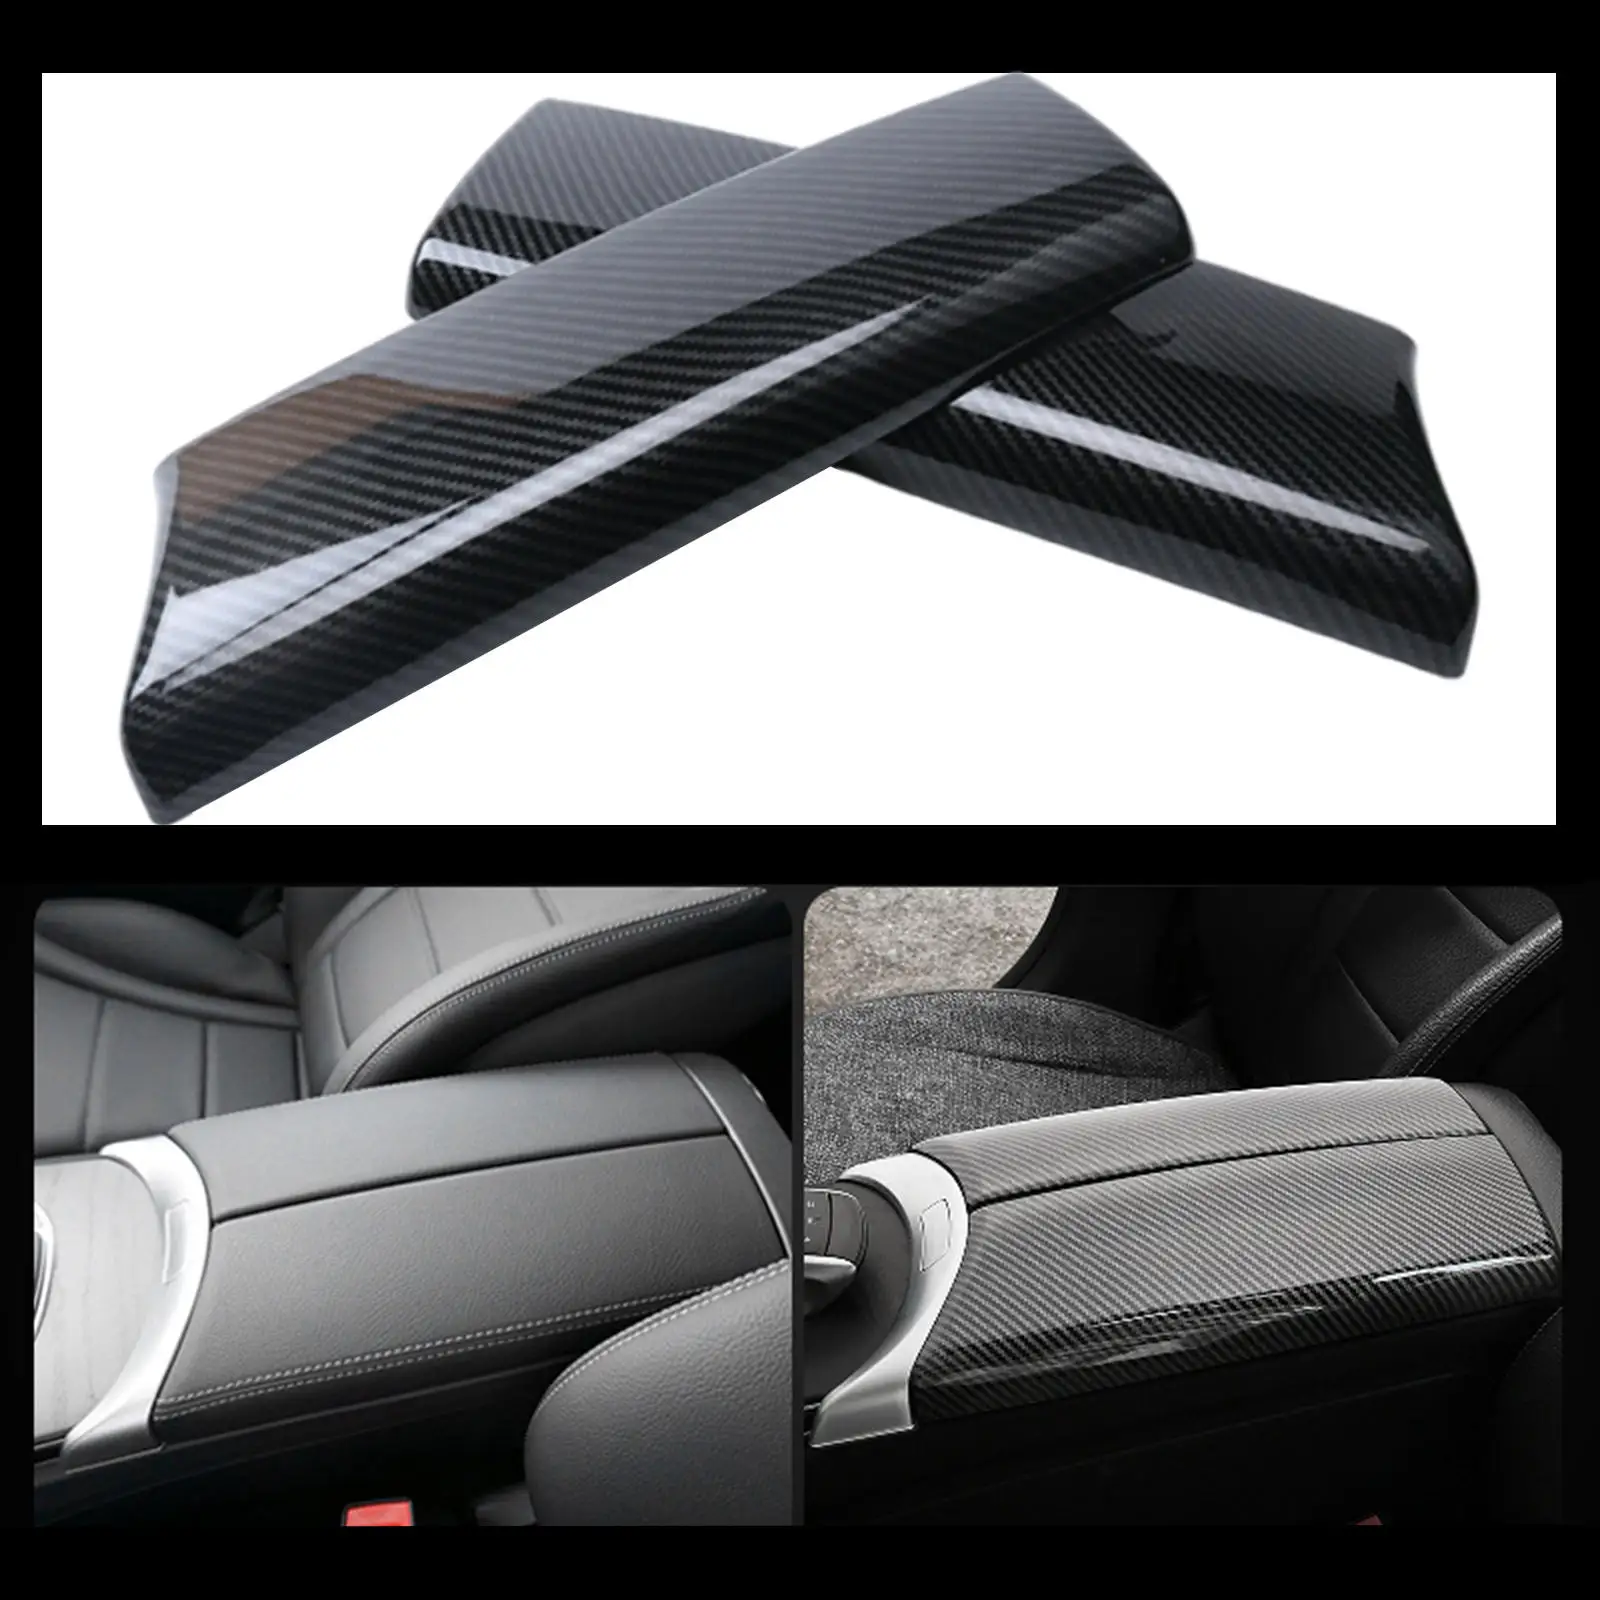 ABS Center Armrest Strip Cover Storage Box Protective Cover Trim Casing for Mercedes C Class W205 GLC x253 2015-21 Stickers